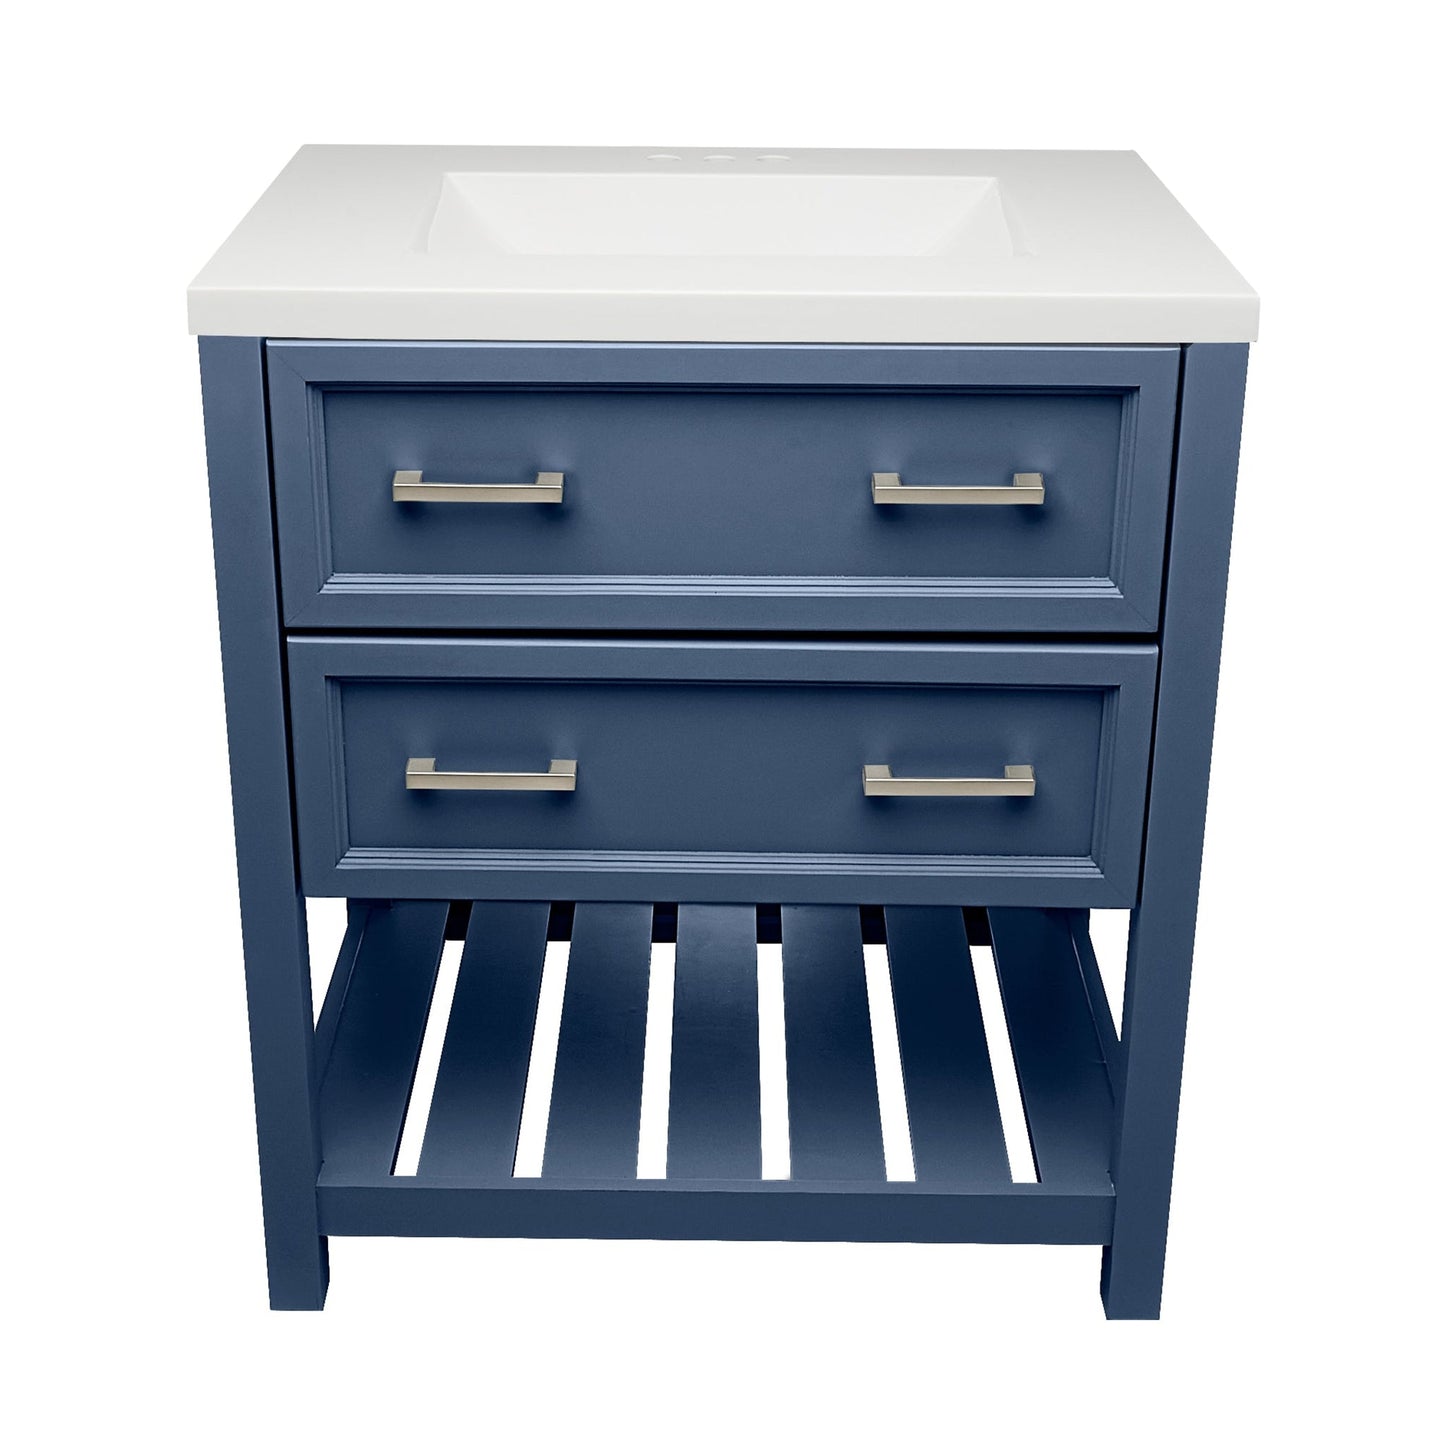 Ella's Bubbles Tremblant 31" Navy Blue Bathroom Vanity With White Cultured Marble Top and Sink